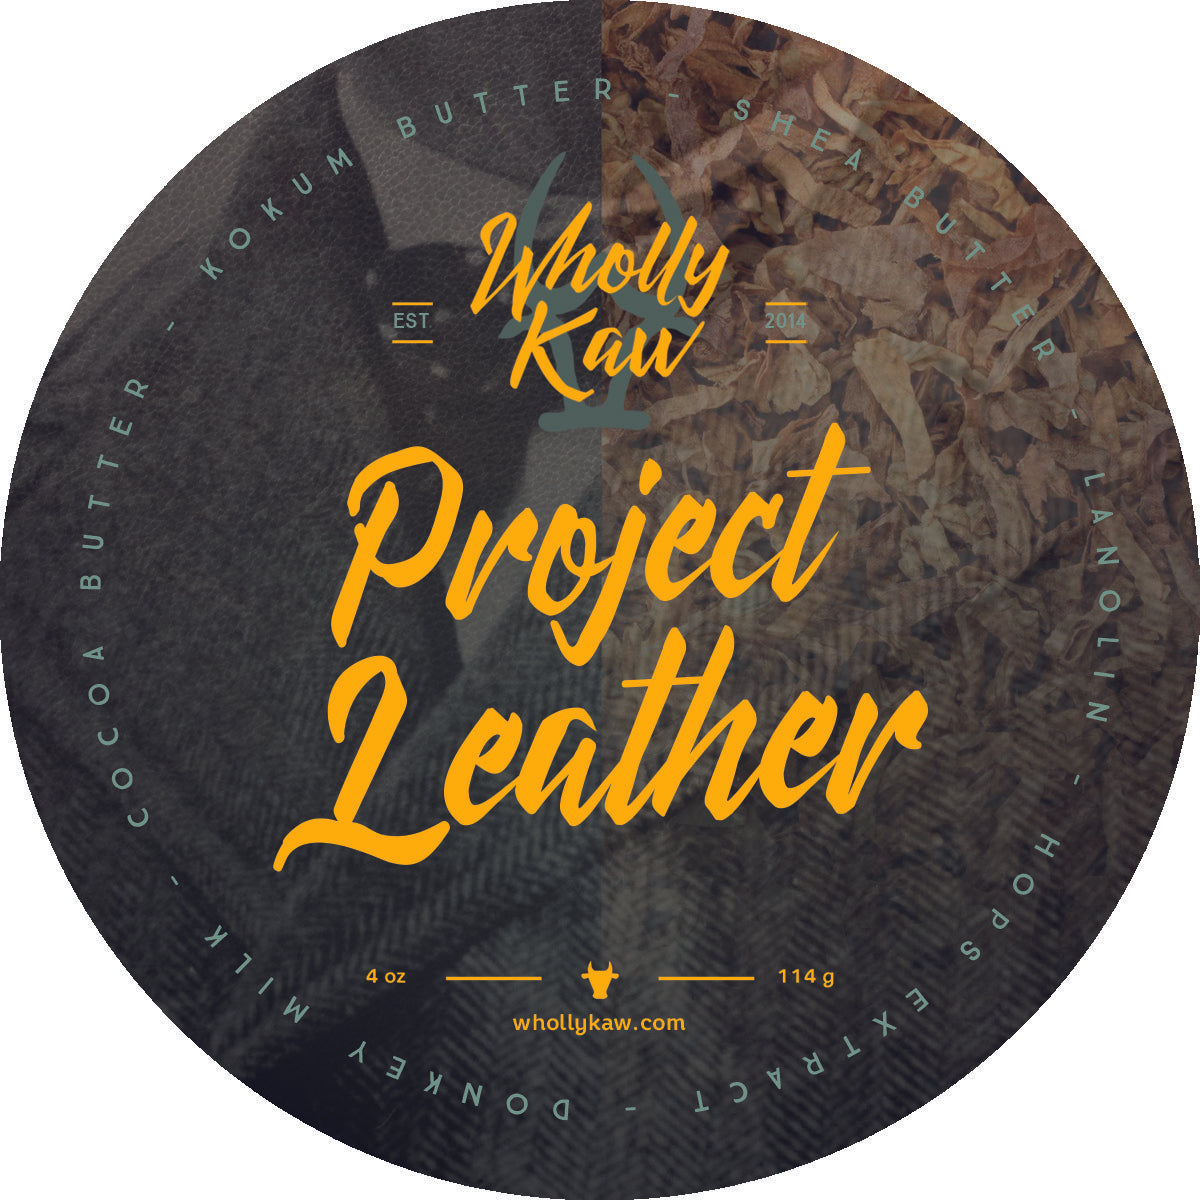 Project Leather Shaving Soap